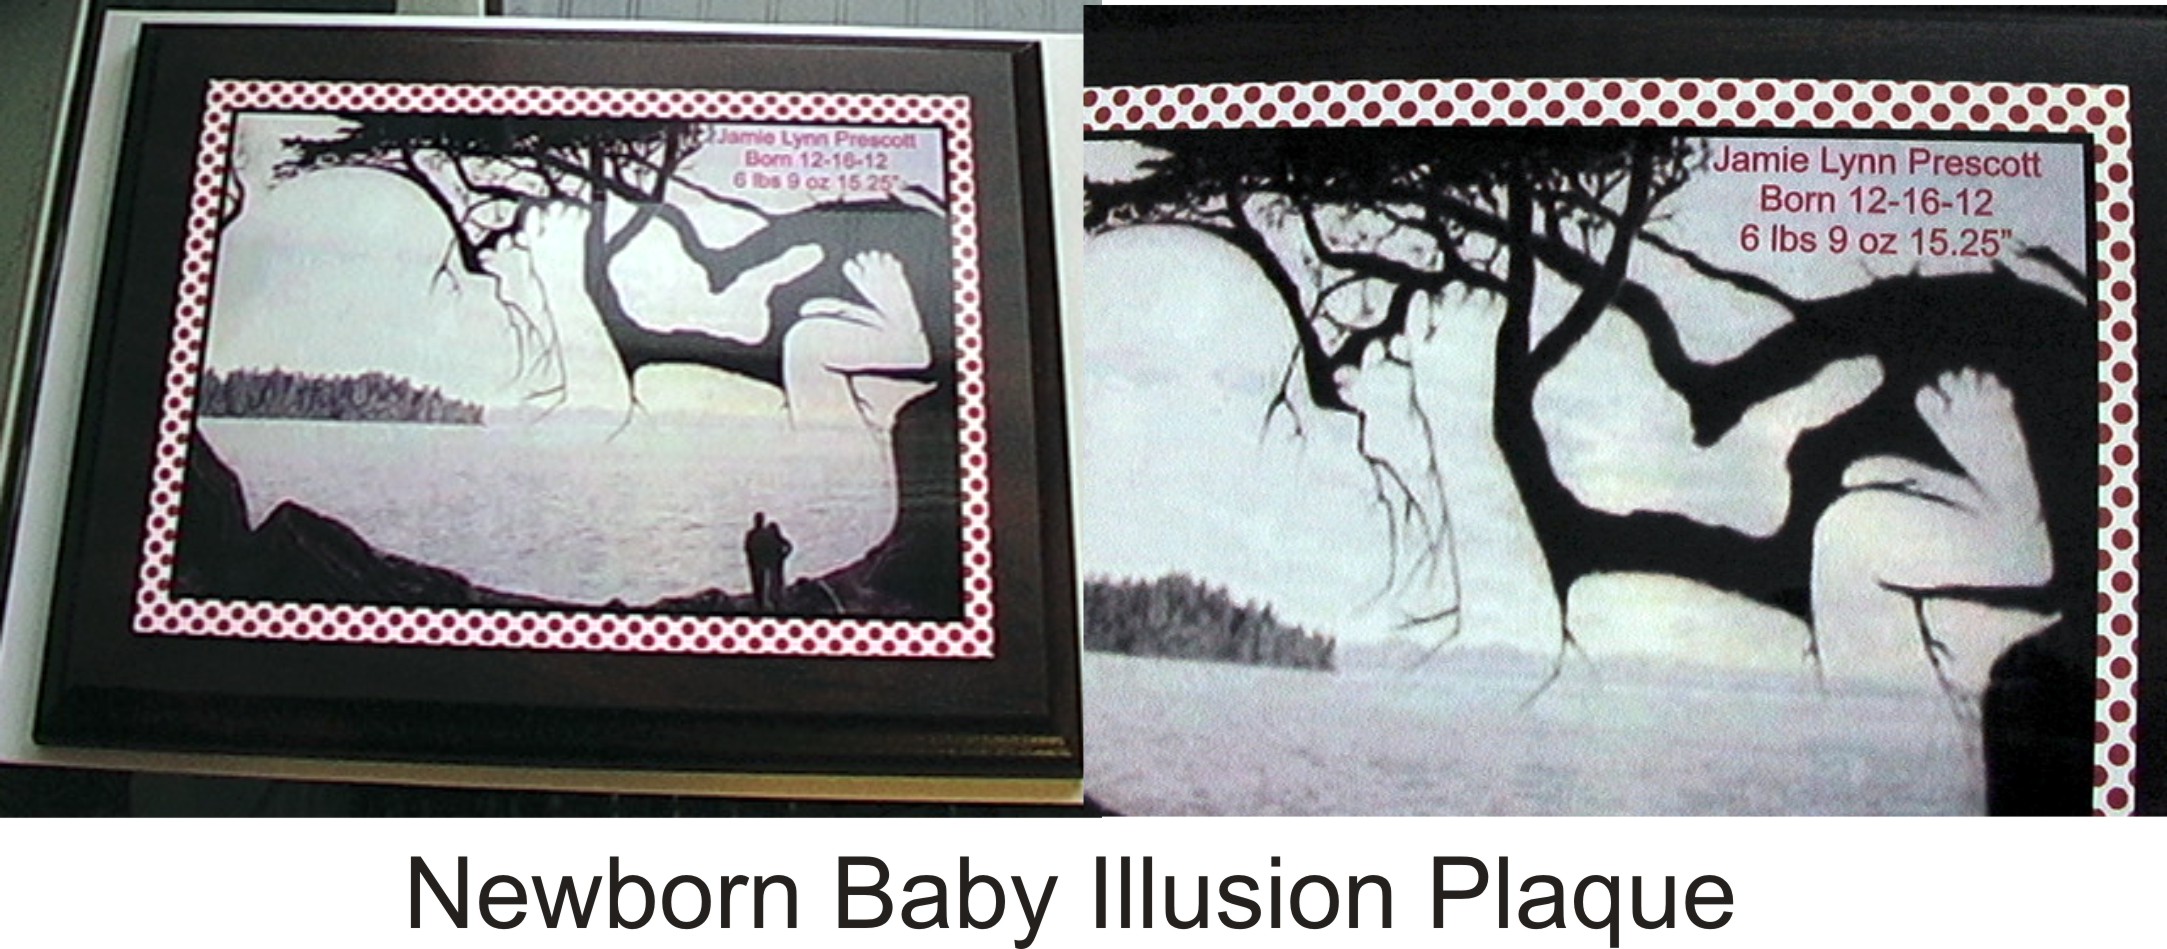 Newborn Illusion Plaque made with sublimation printing